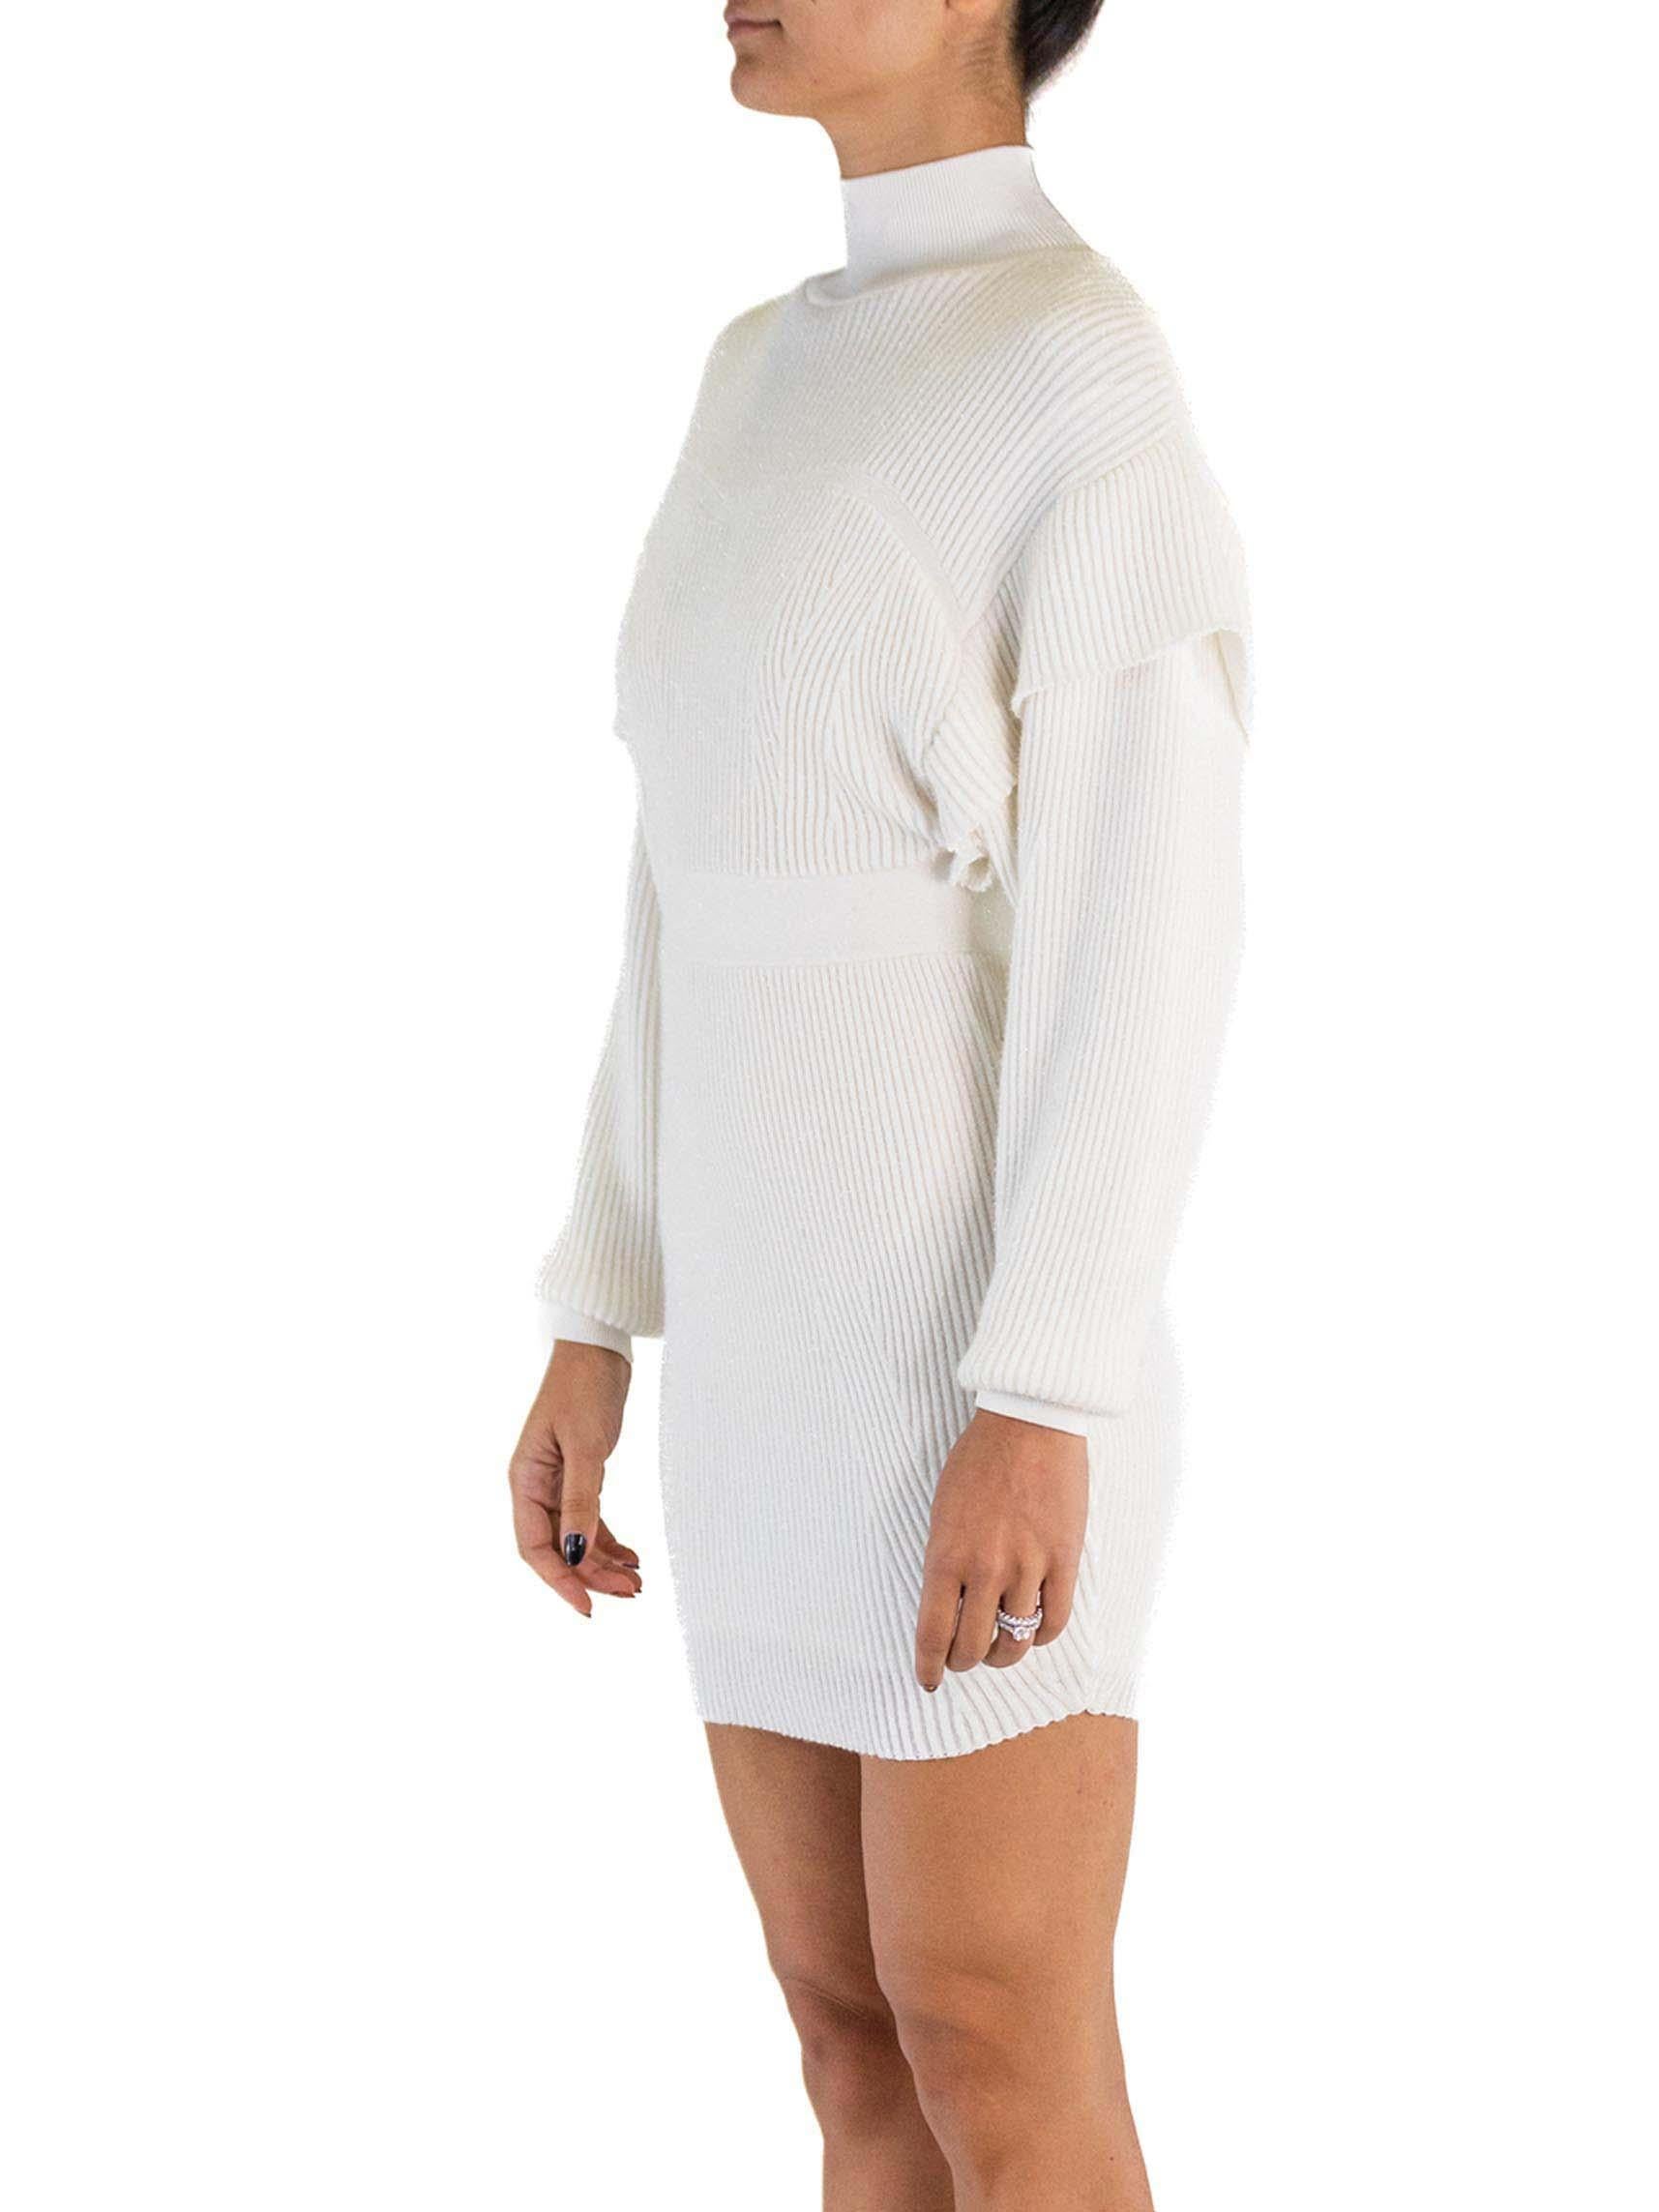 2000S Herve Leger White Bright Rayon Knit Body-Con Sweater Dress In Excellent Condition In New York, NY